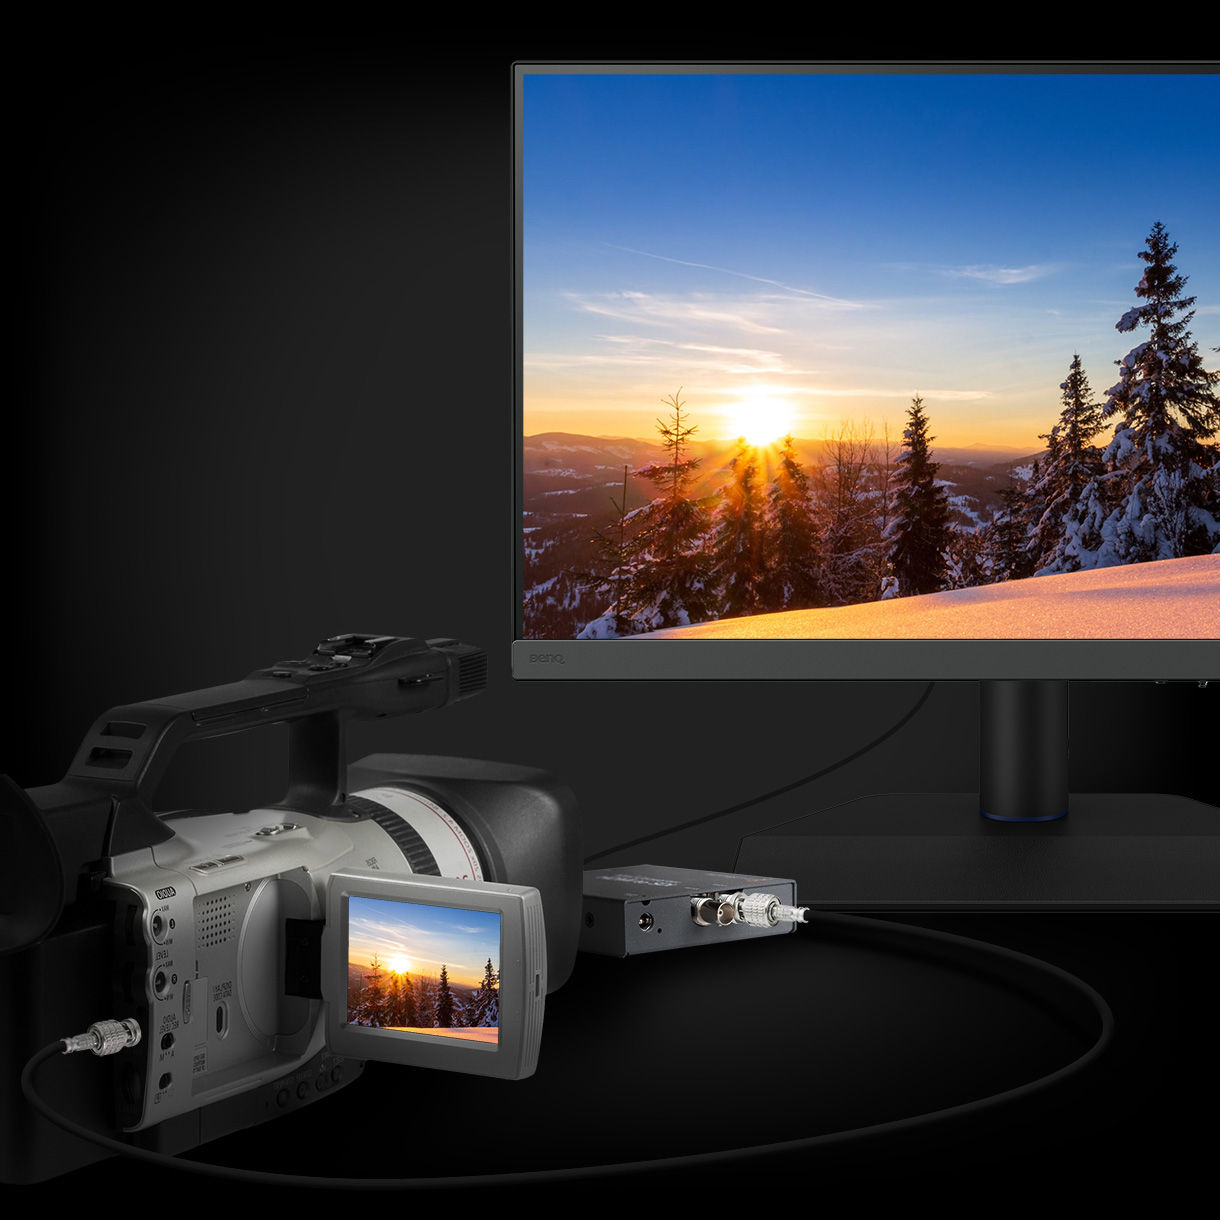 BenQ has tested select SDI to HDMI devices as compatible with SW272U. Videographers can thus connect their SDI devices to the monitor for stable and non-compressed signal transmission and real quality video image. 